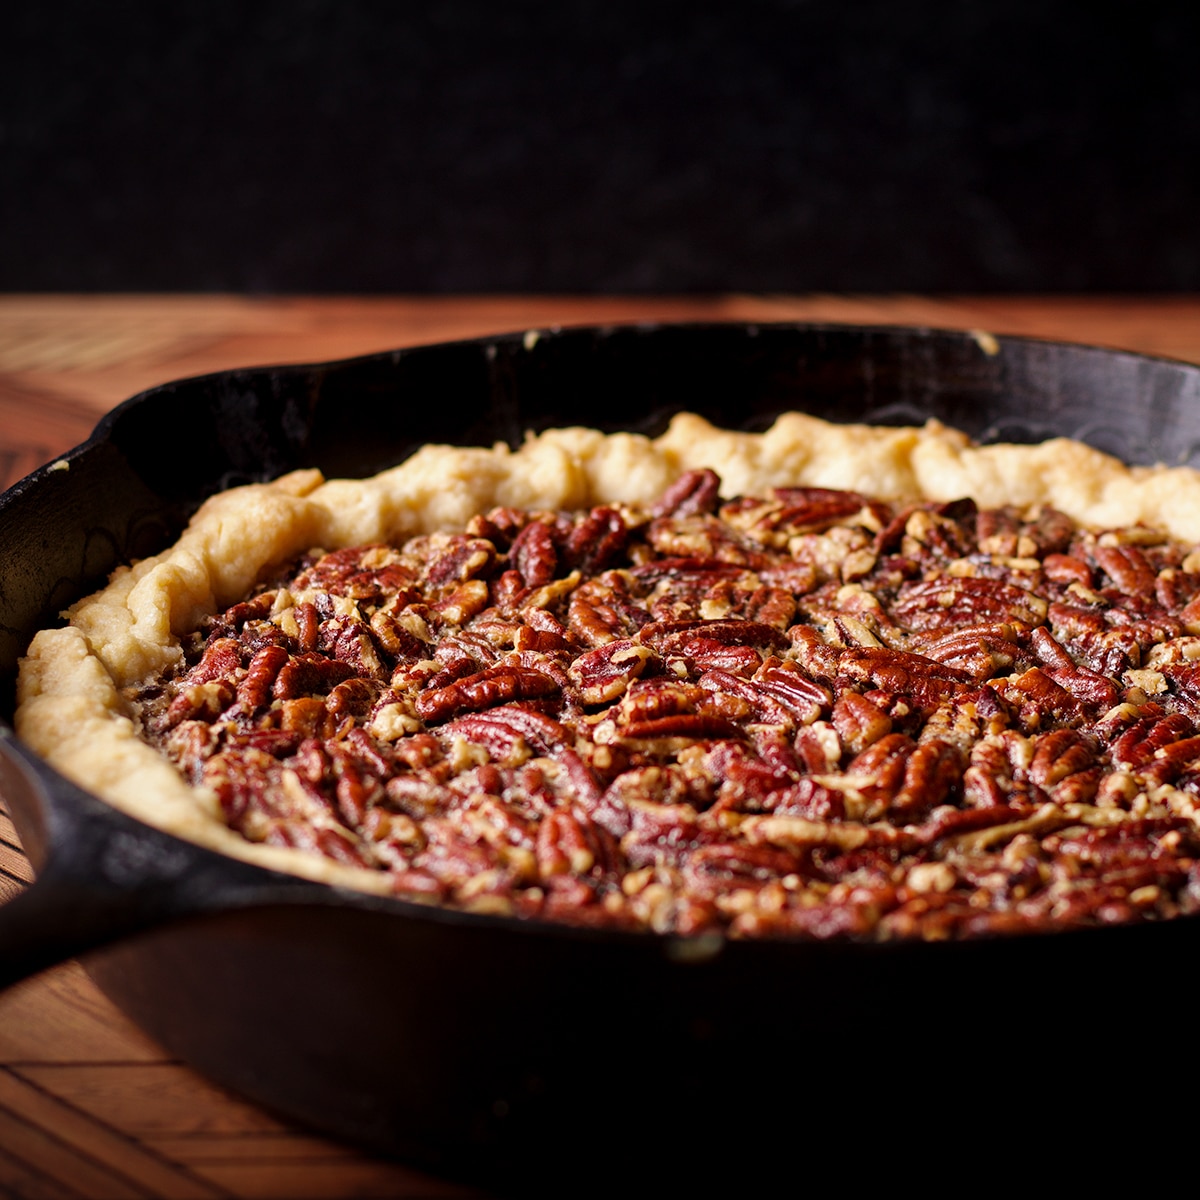 A freshly baked pecan pie in a cast iron skillet.